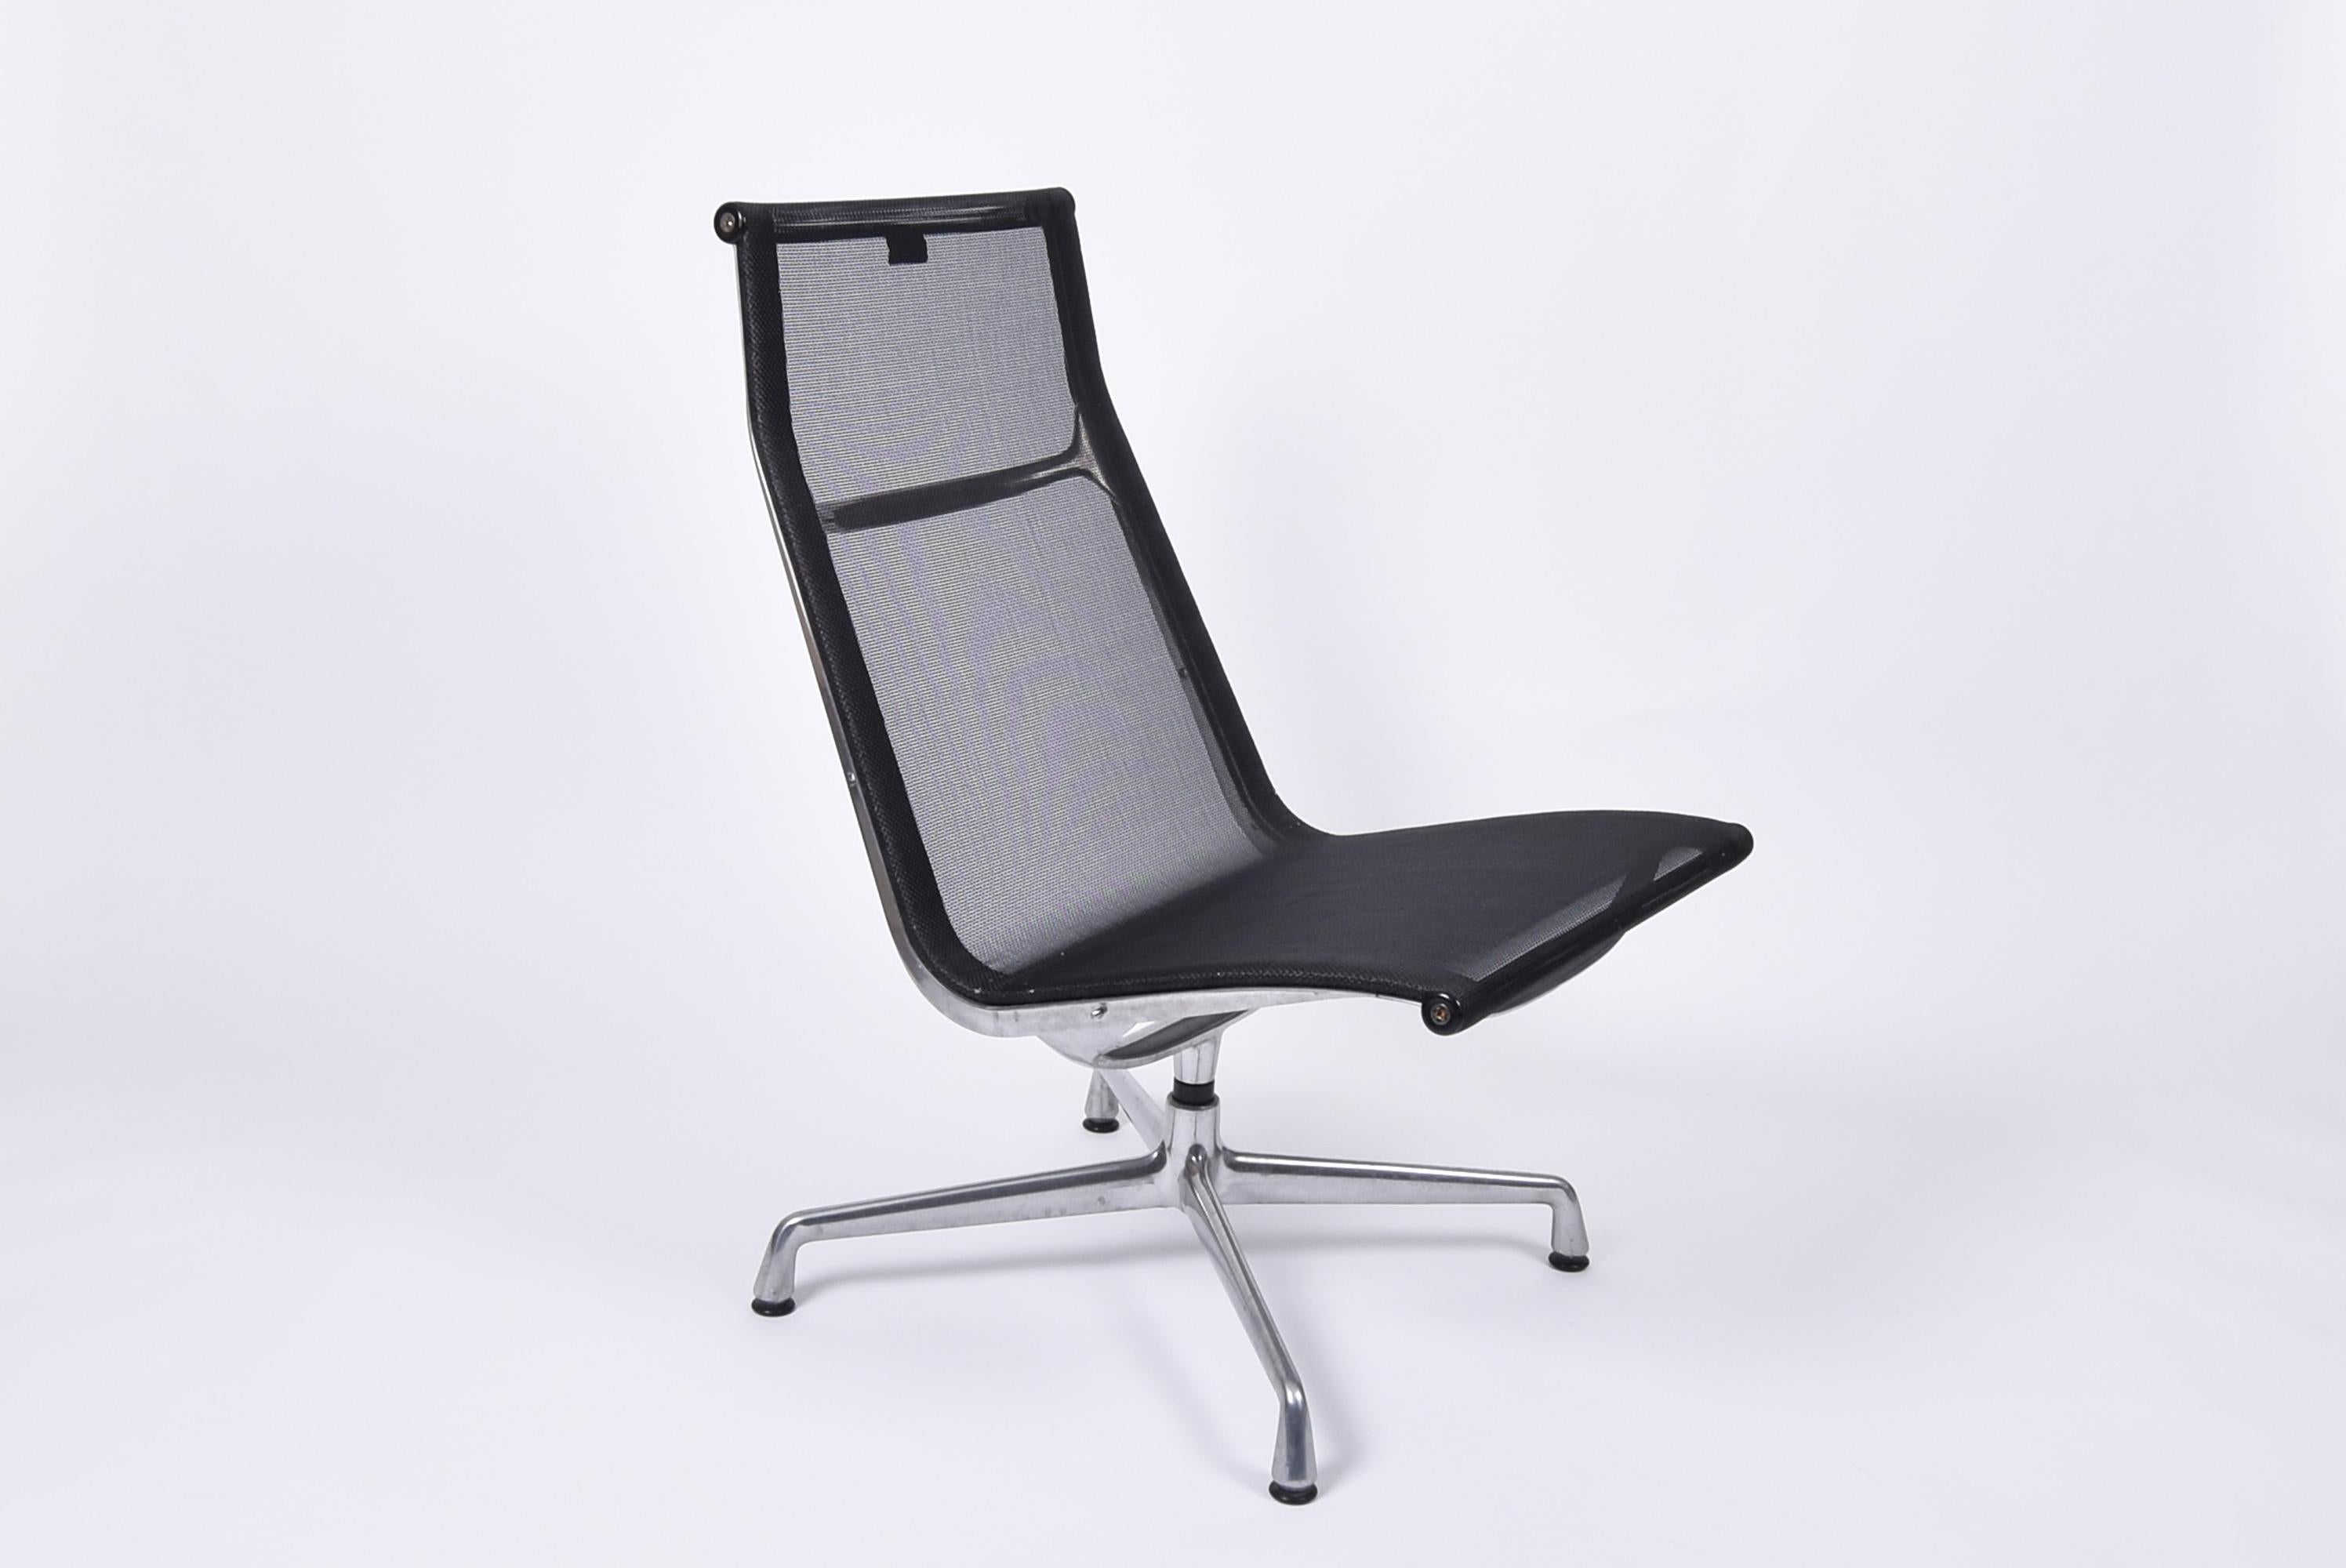 Mid-Century Modern lounge chair ea 115, designed in 1958 by Charles and Ray Eames.
Produced by Vitra.
Aluminium base and black net seat.
 